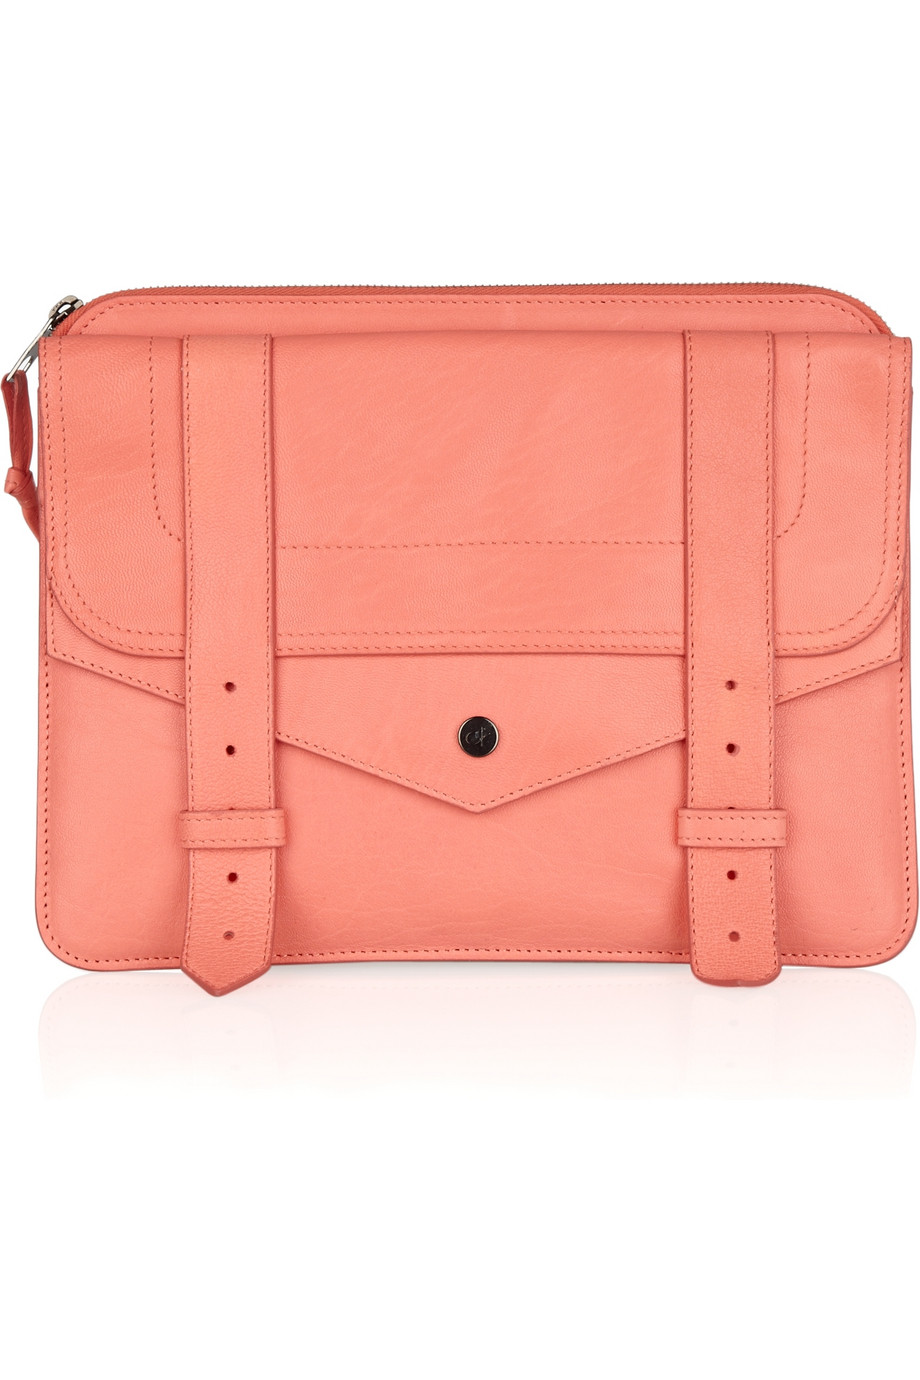 15 Most Stylish iPad Cases - The Front Row View